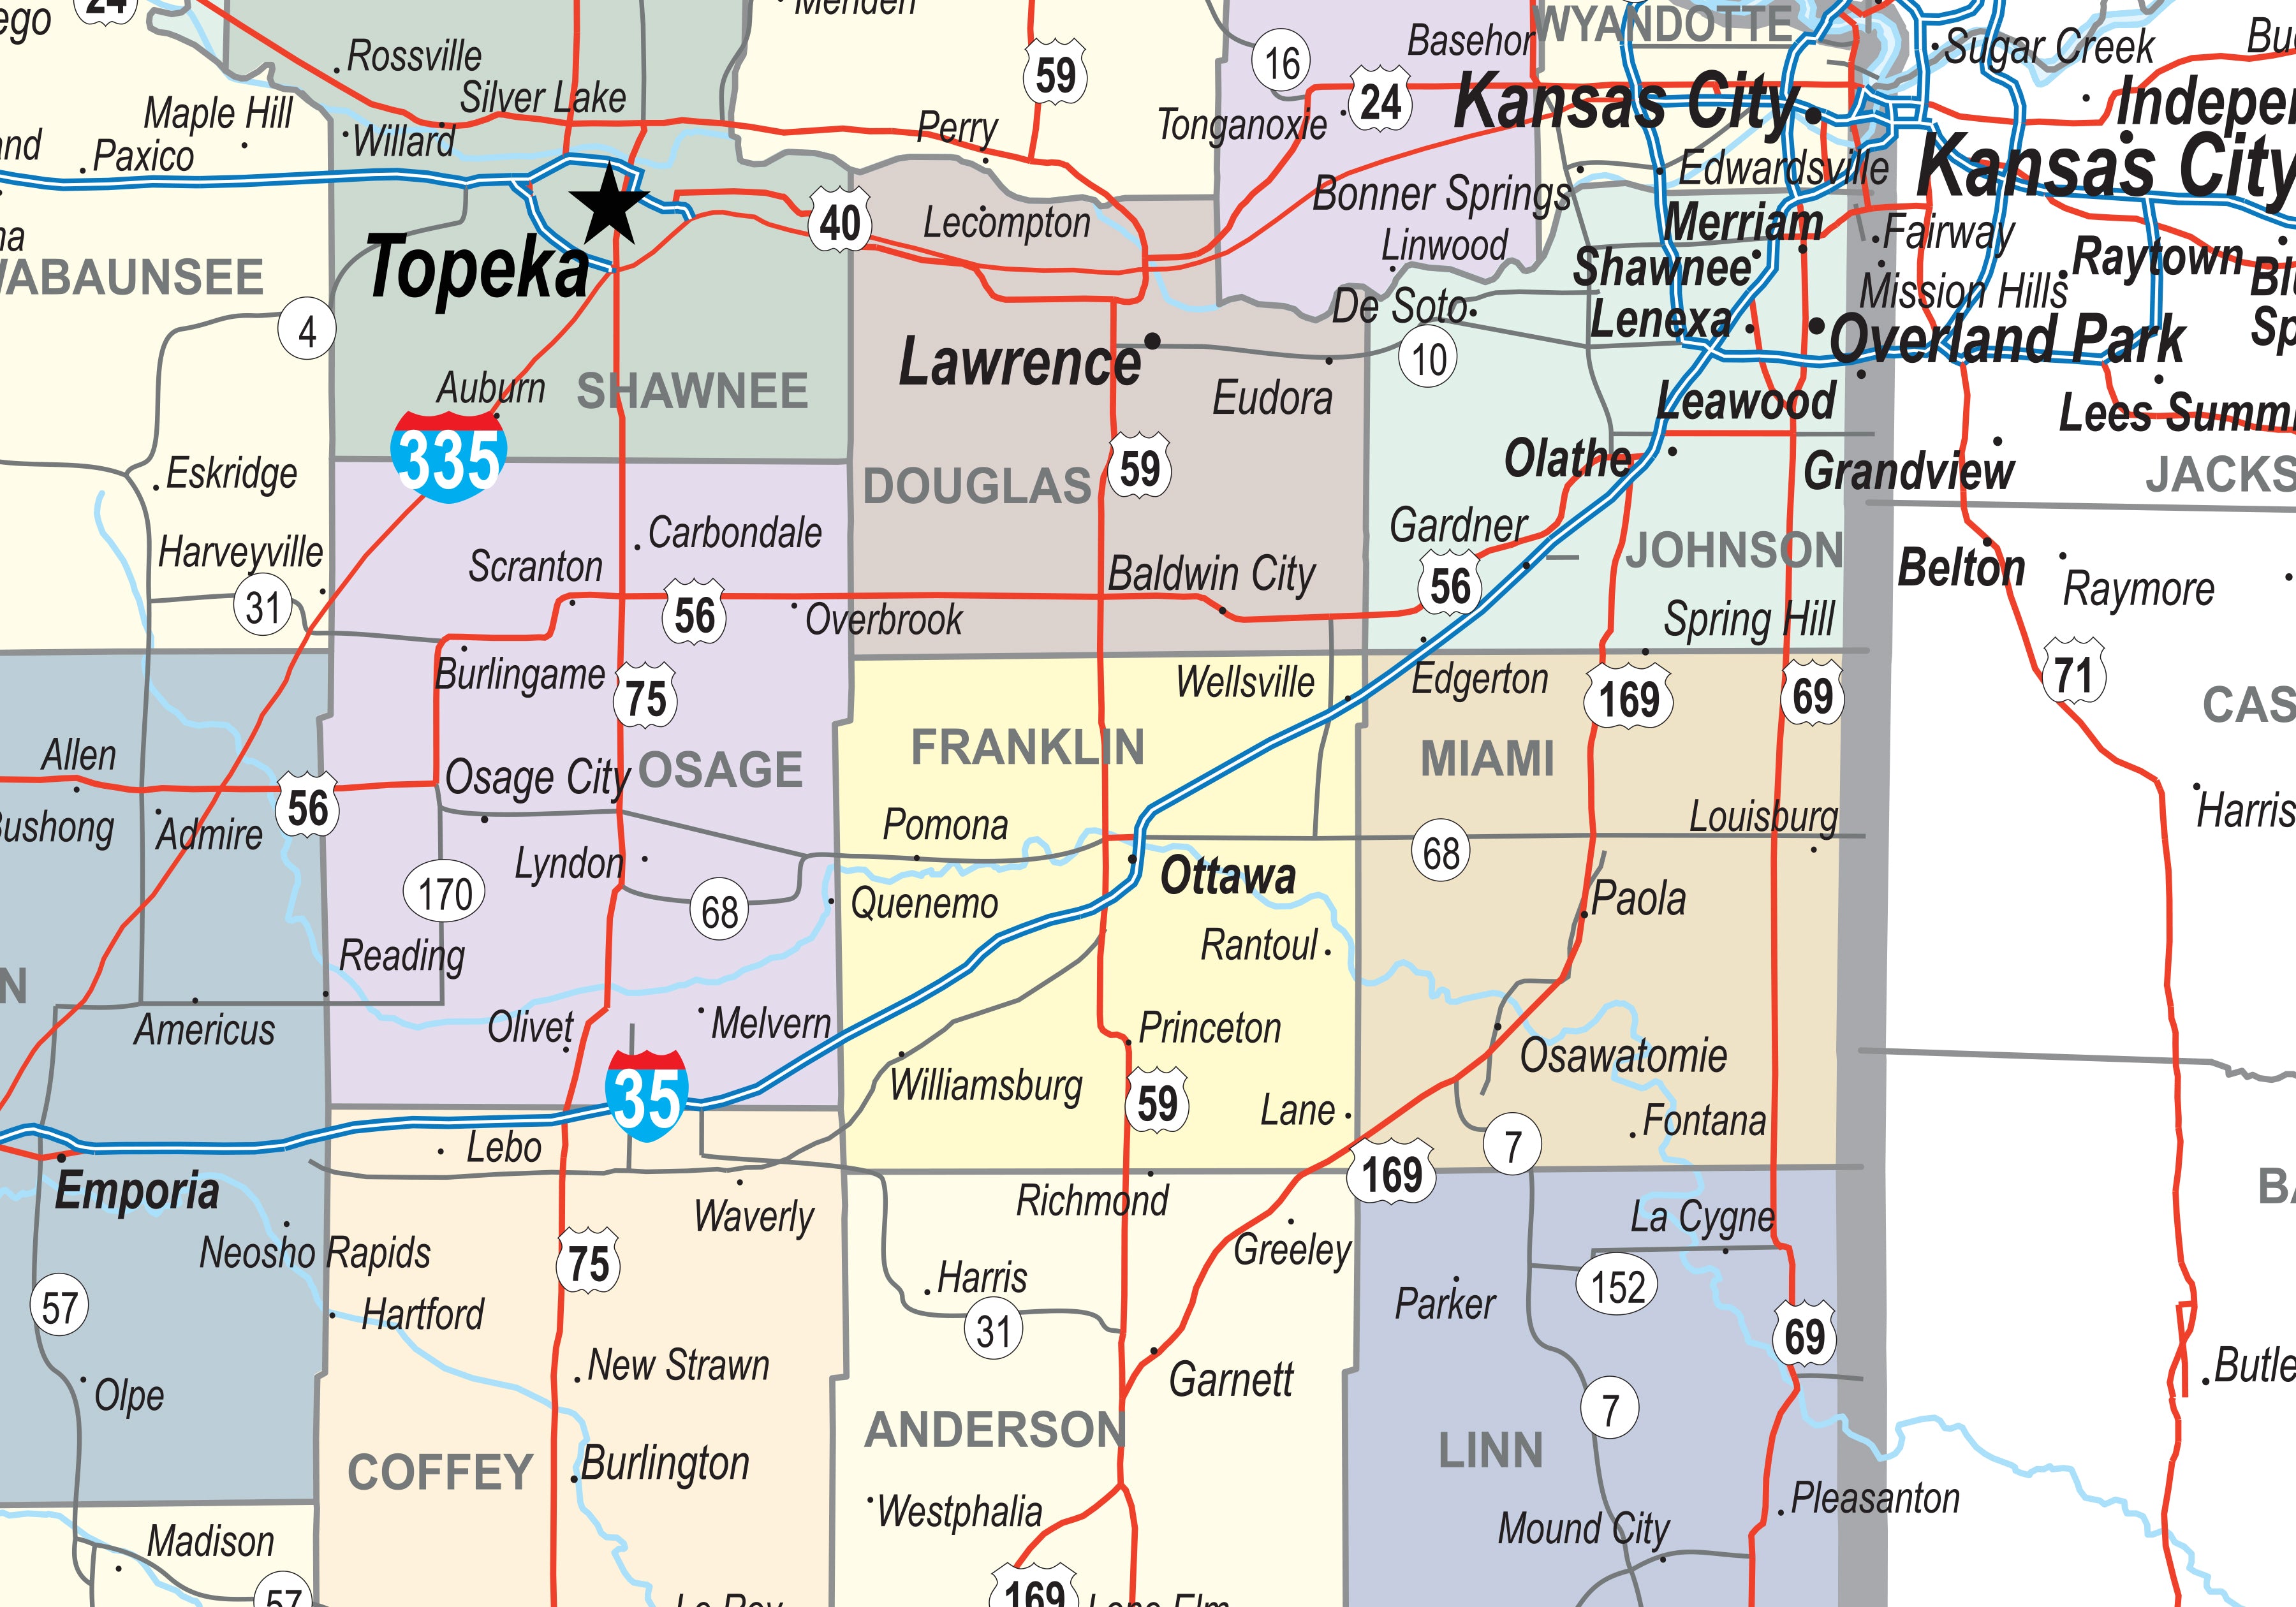 Labeled Map Of Kansas With Capital Cities - vrogue.co